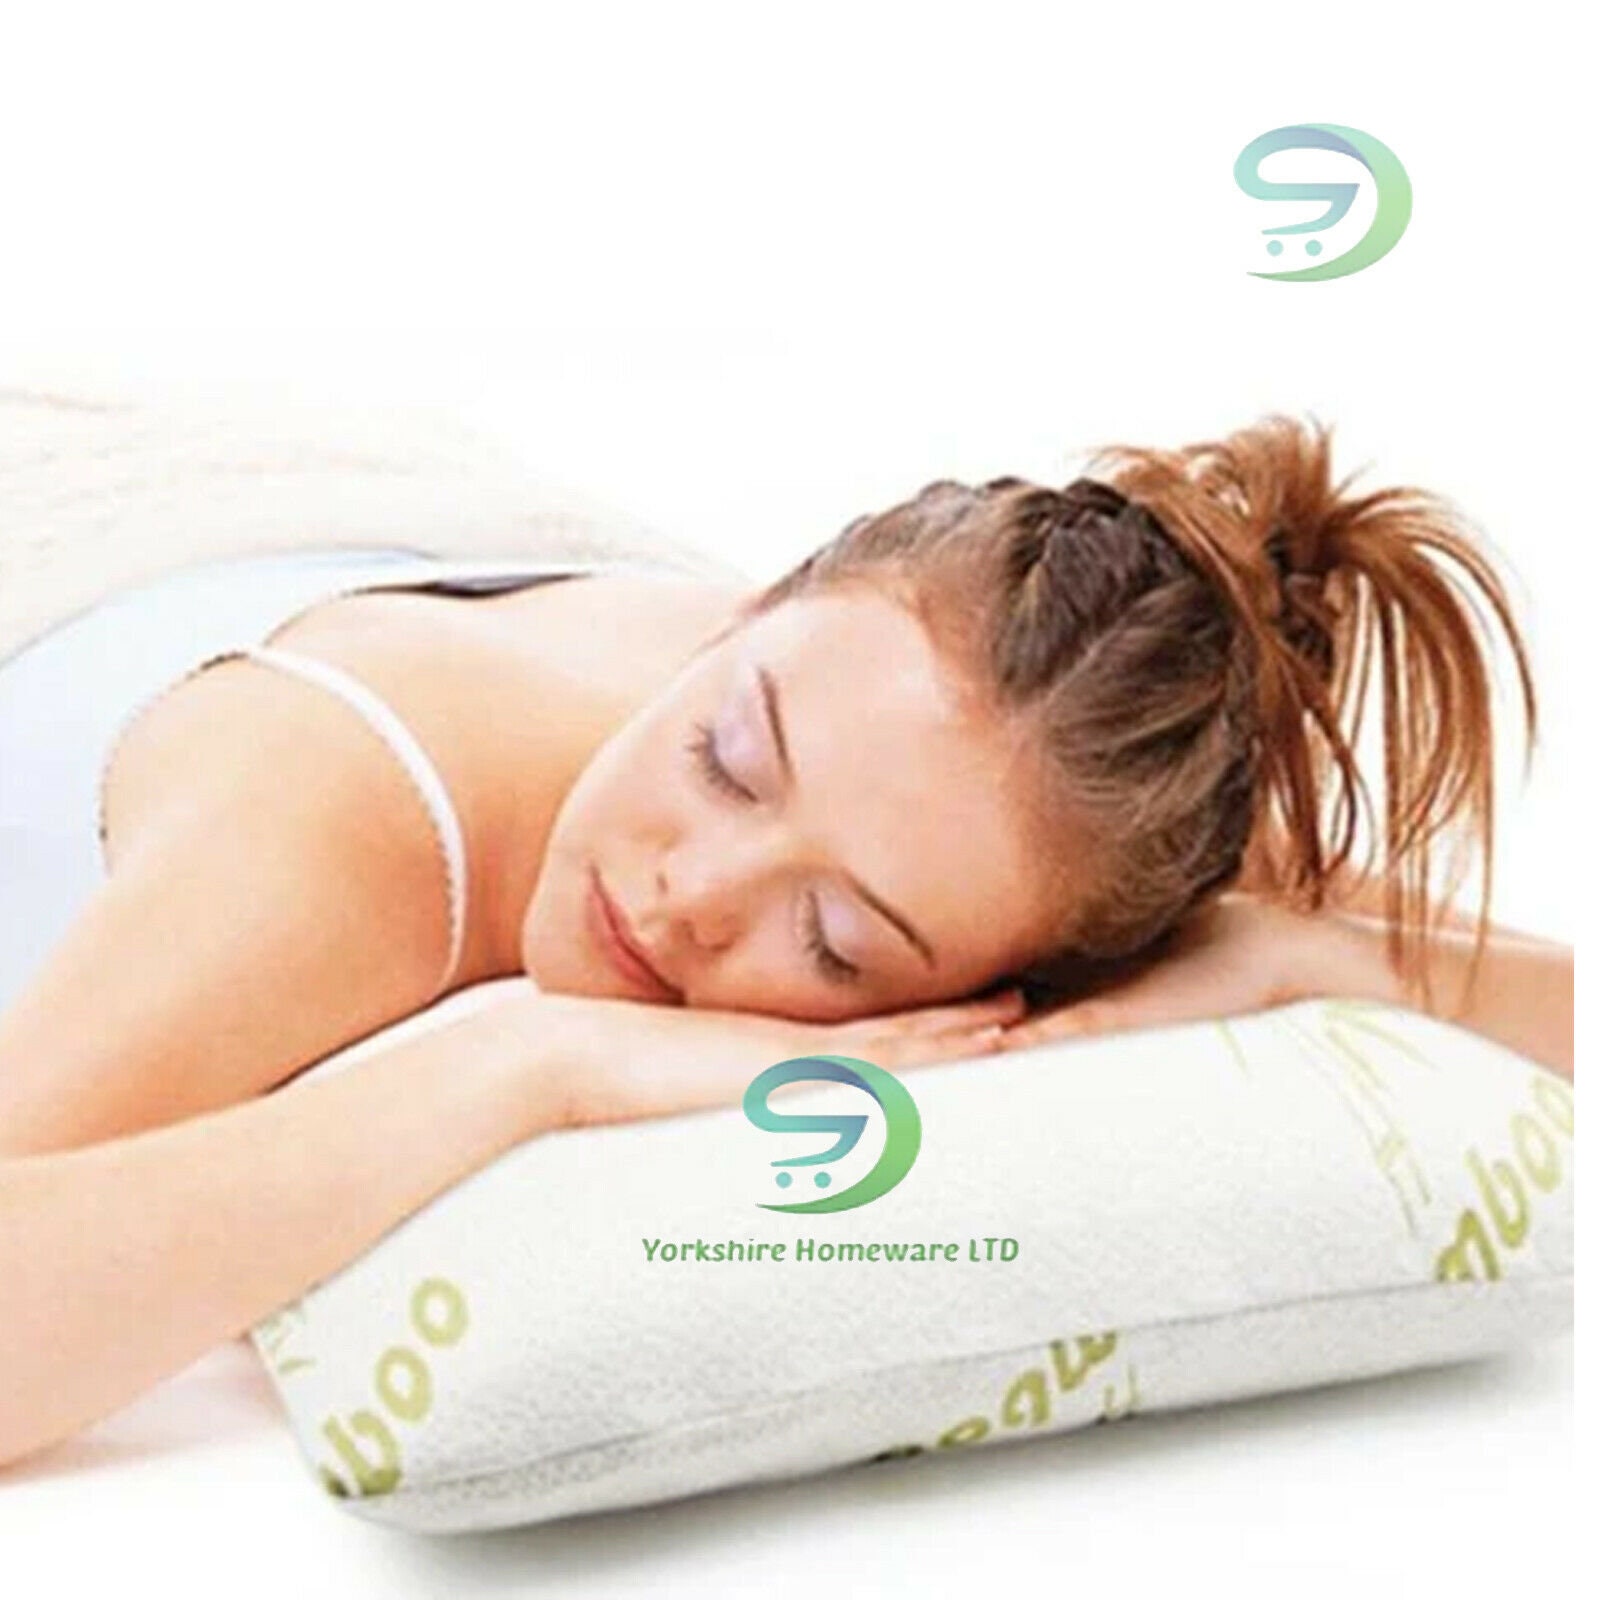 Primo International Fairy Memory Foam Pillow with Bamboo Cover